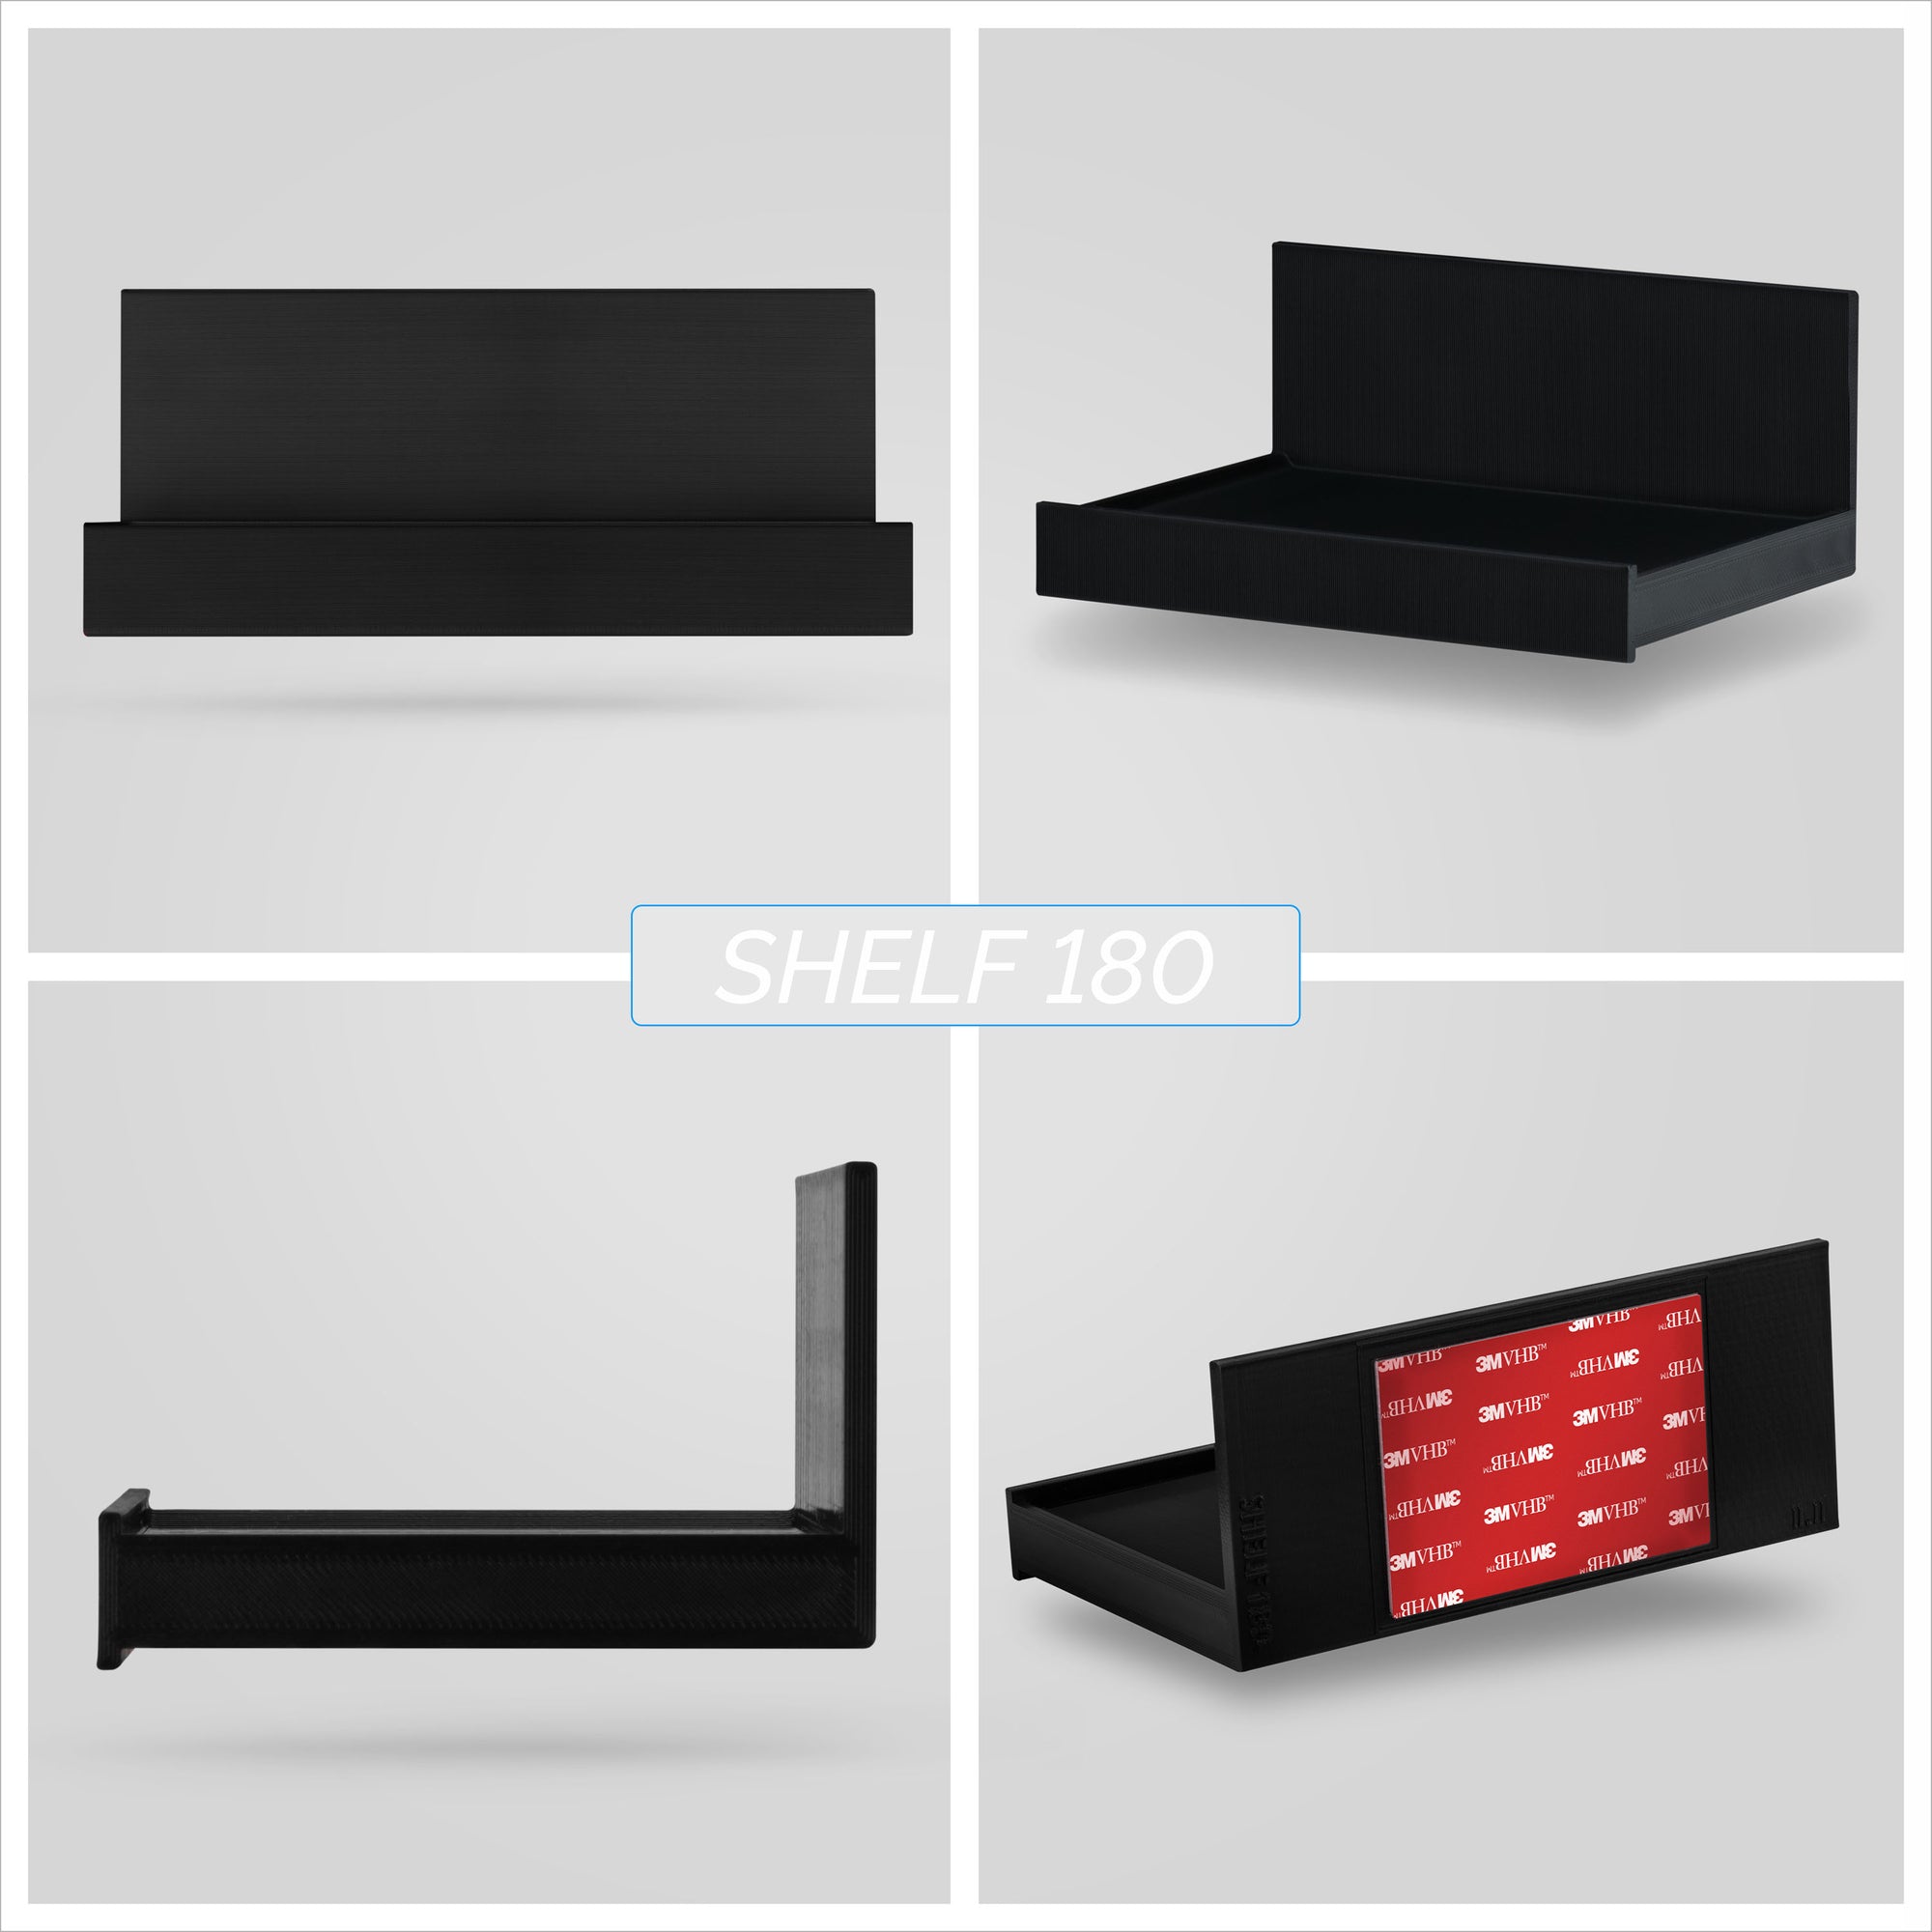 Adhesive Monitor Floating Shelf For Security Cameras And Baby